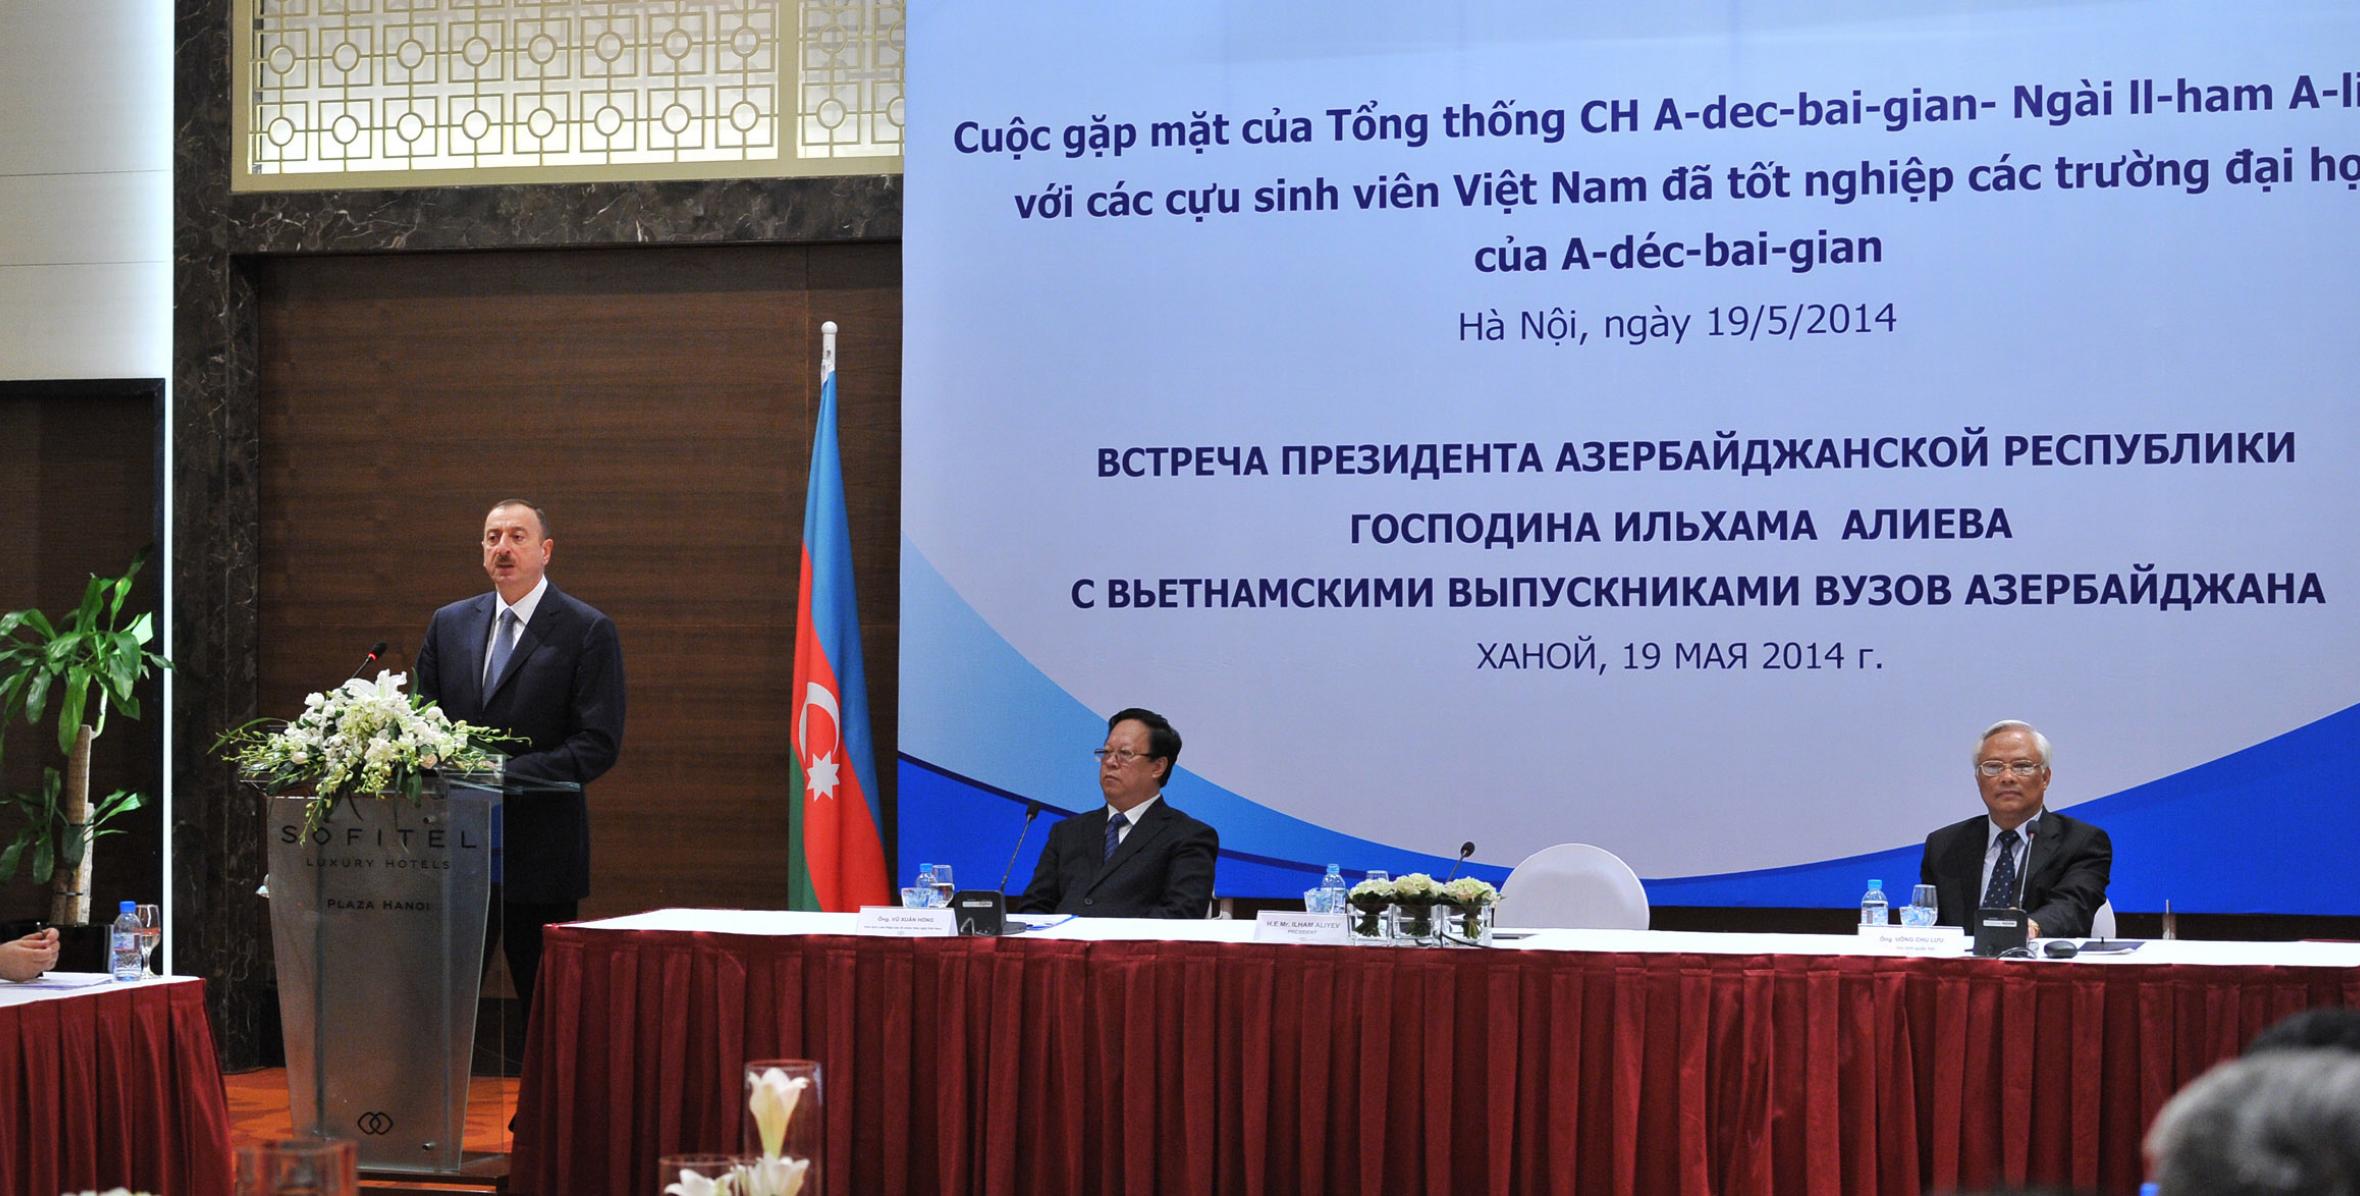 Speech by Ilham Aliyev at the meeting in Hanoi with Vietnamese students educated in Azerbaijan